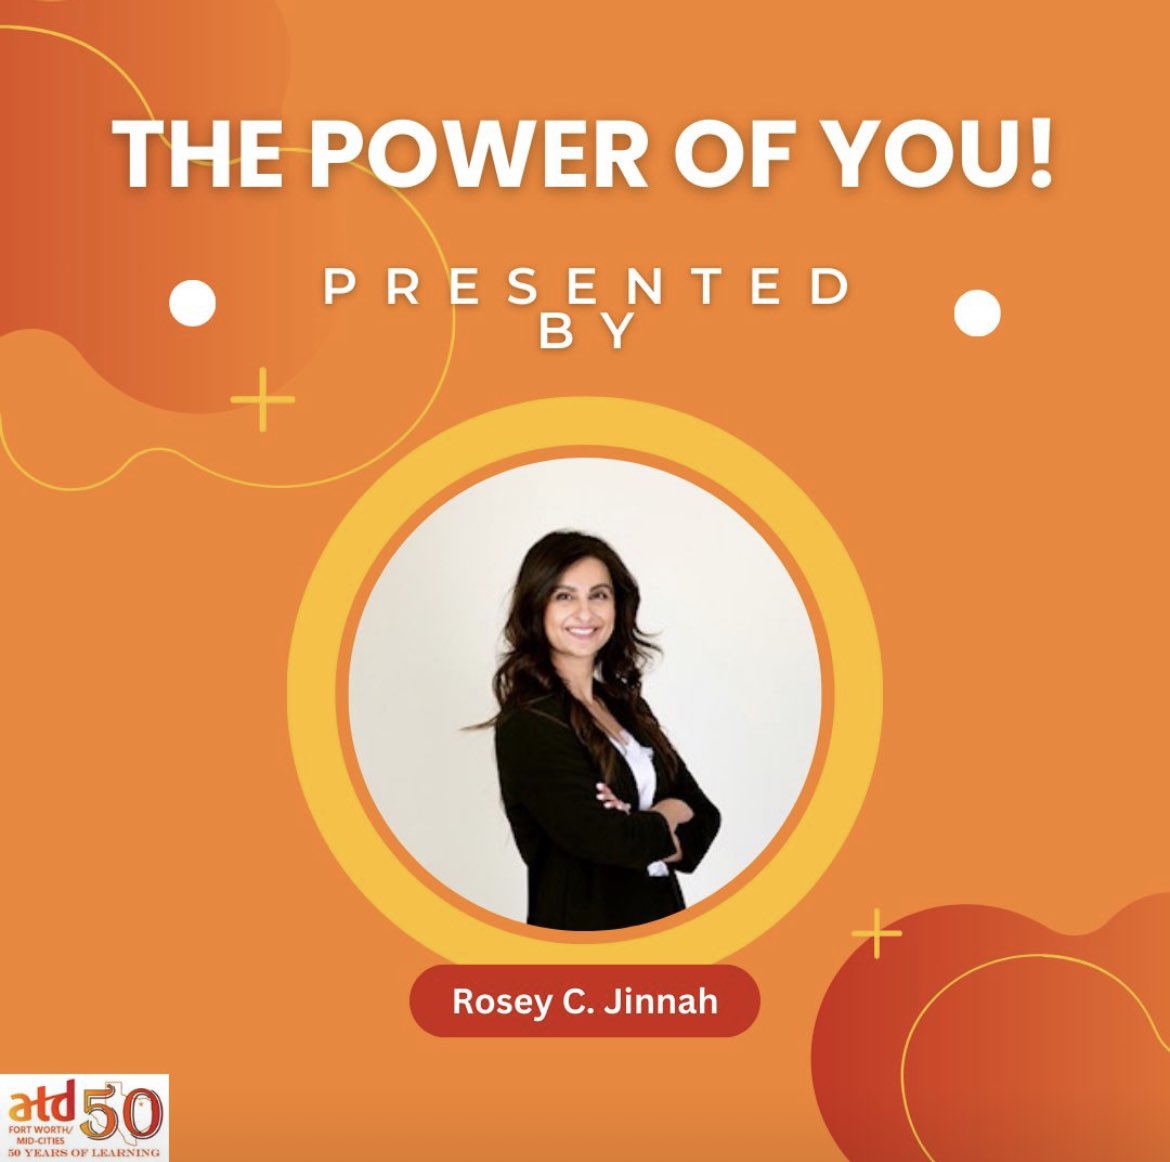 The learning continues with #ATDFW! 

Come learn with us as Rosey C. Jinnah presents, The Power of YOU! on Thursday, March 28th!

lnkd.in/gSNJT8-A

#alwayslearning #learningcommunity #talentdevelopment